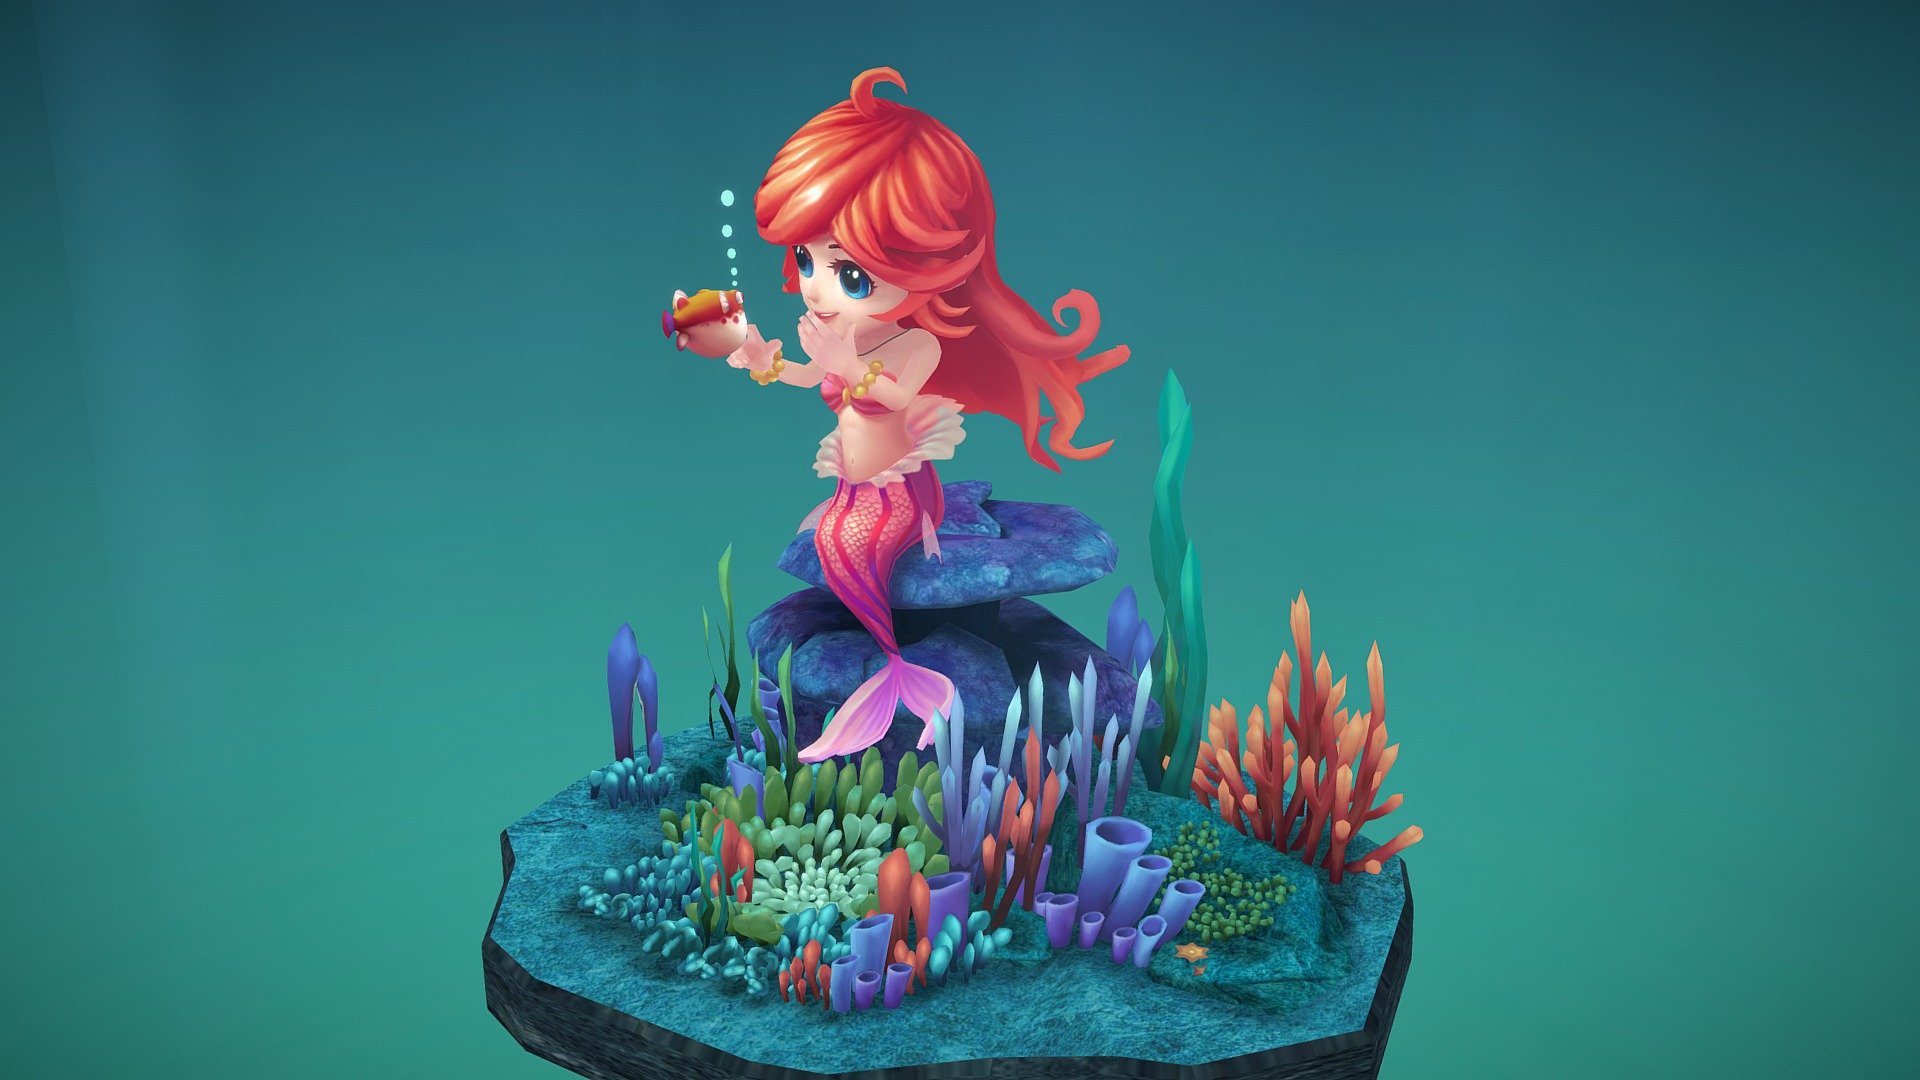 This mermaid is a previous project, now I have solved it. I hope she can get inspiration from the story. I hope you like it! - Mermaid - 3D model by louy 3d model